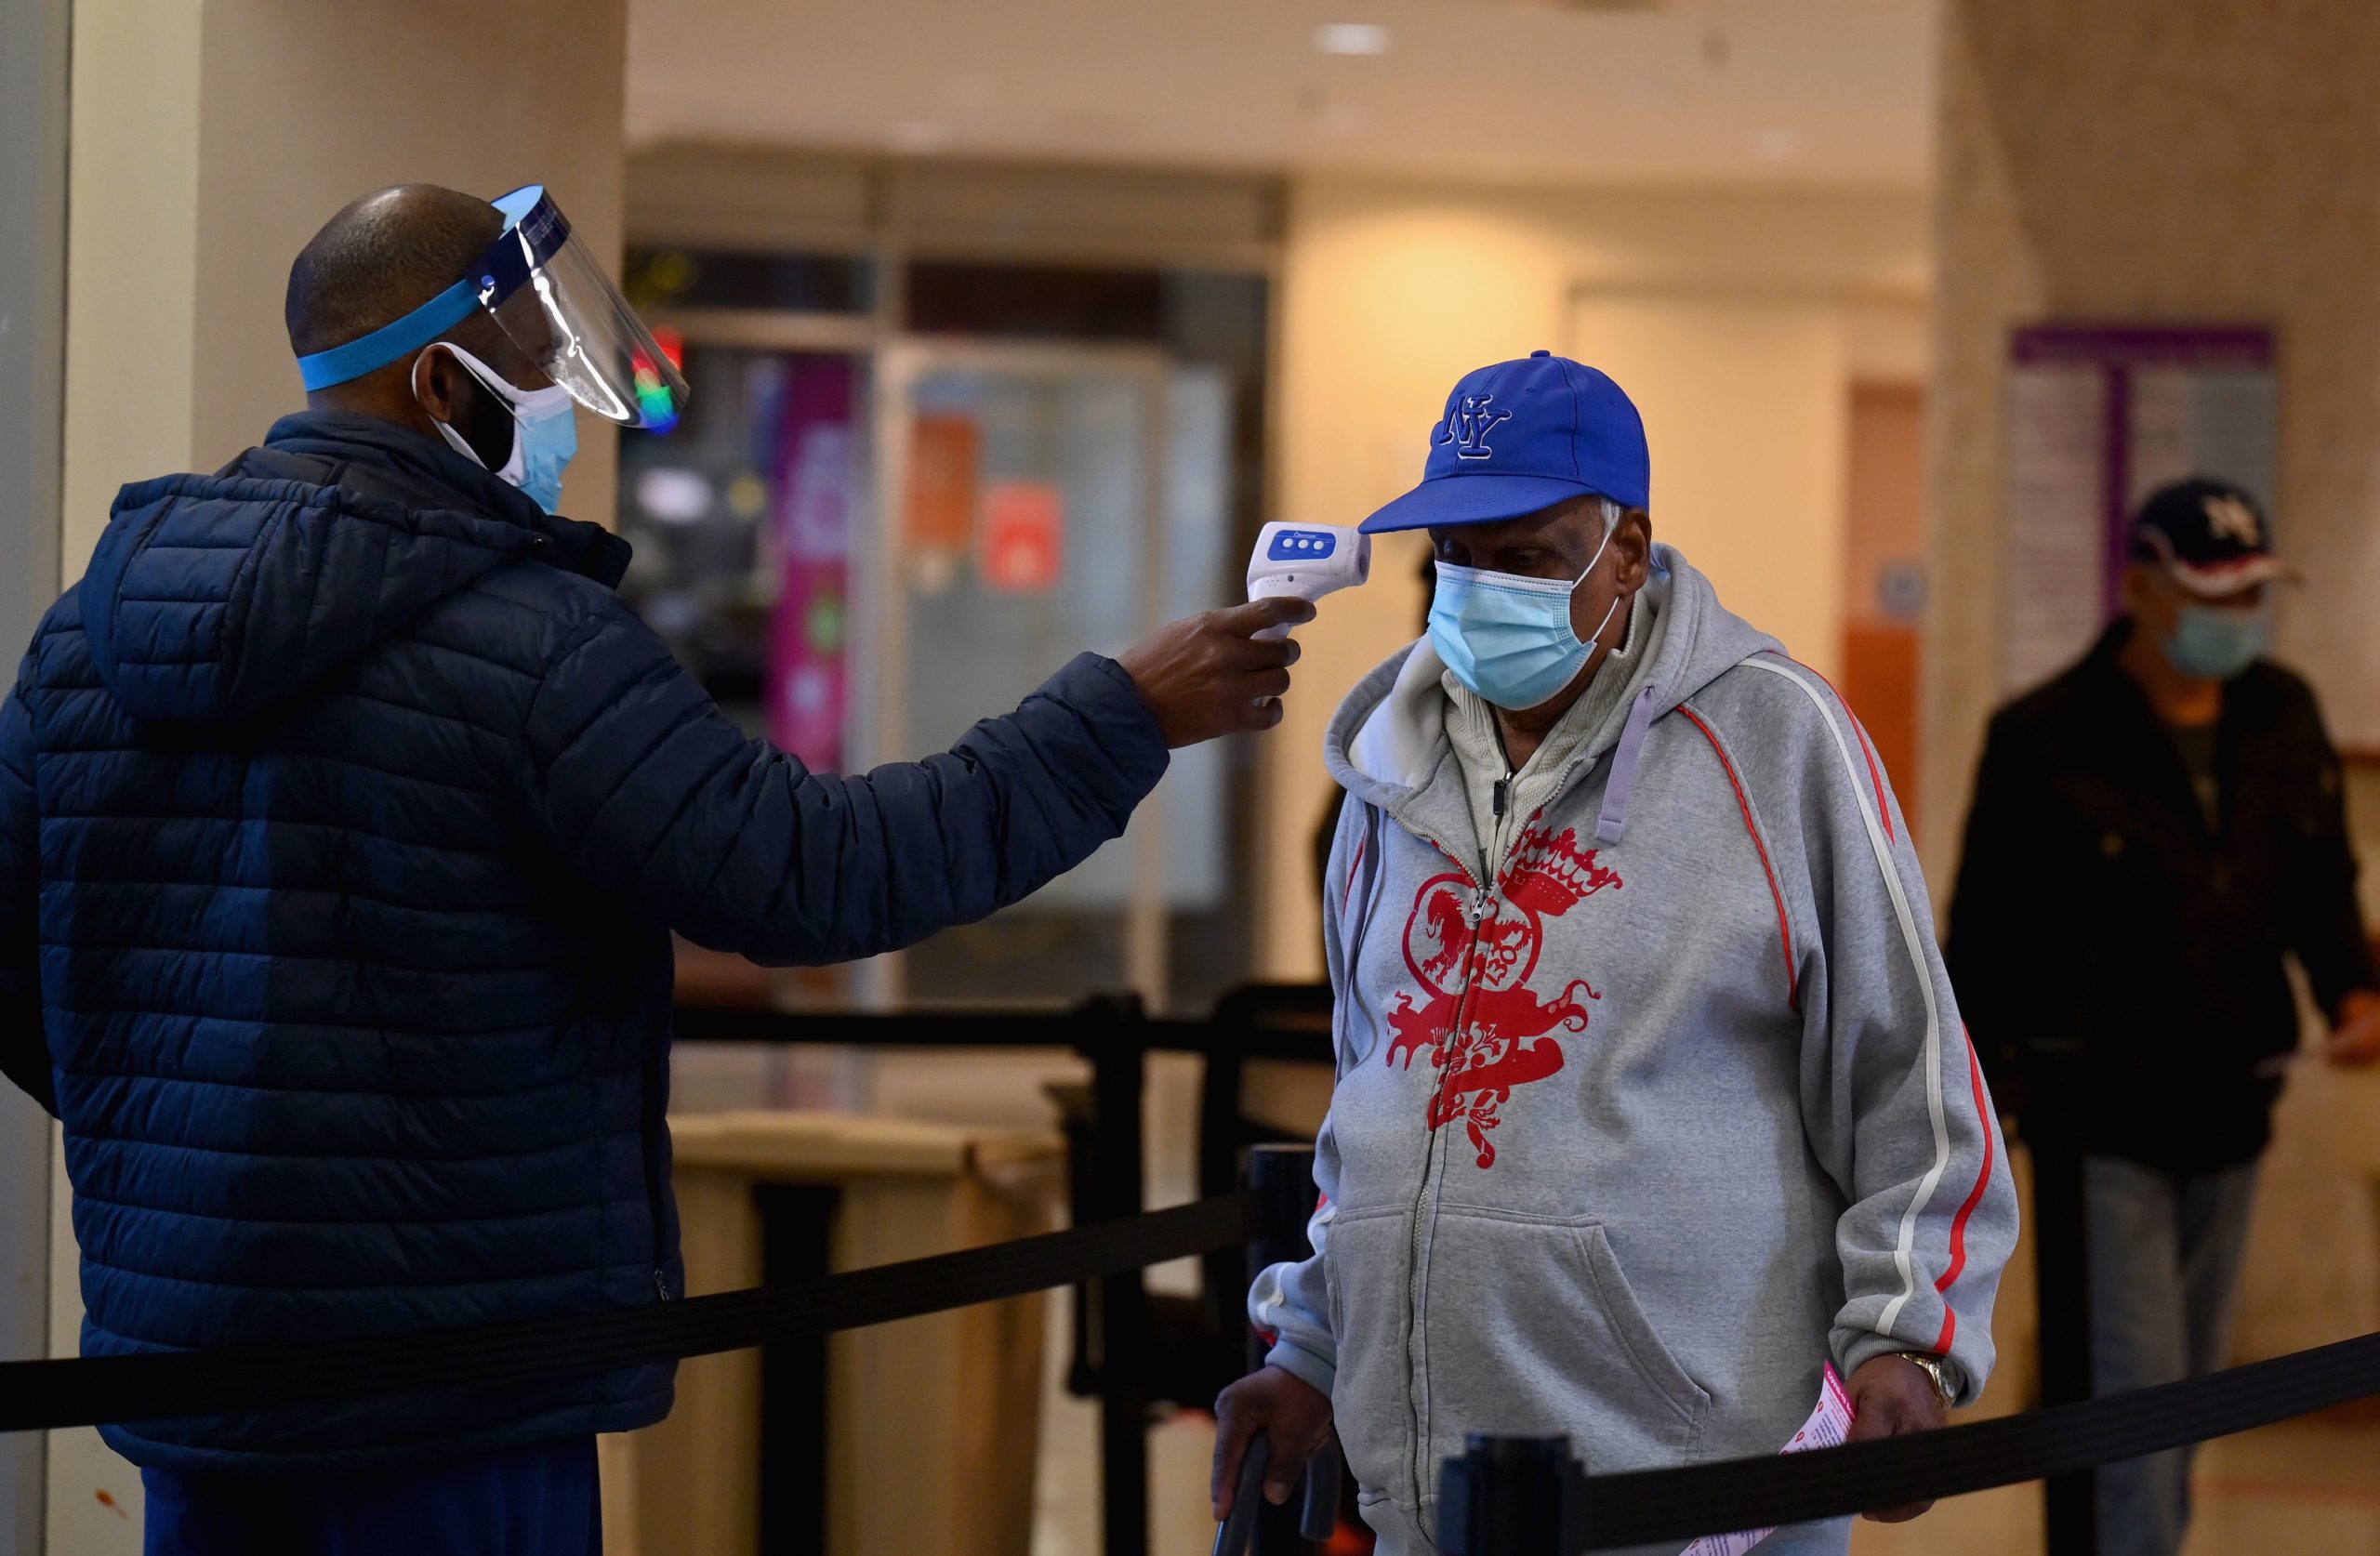 A staff member checks the temperature of a visitor at Woodhull Medical and Mental Health Center on Dec. 1 in New York City. (Angela Weiss/AFP via Getty Images)